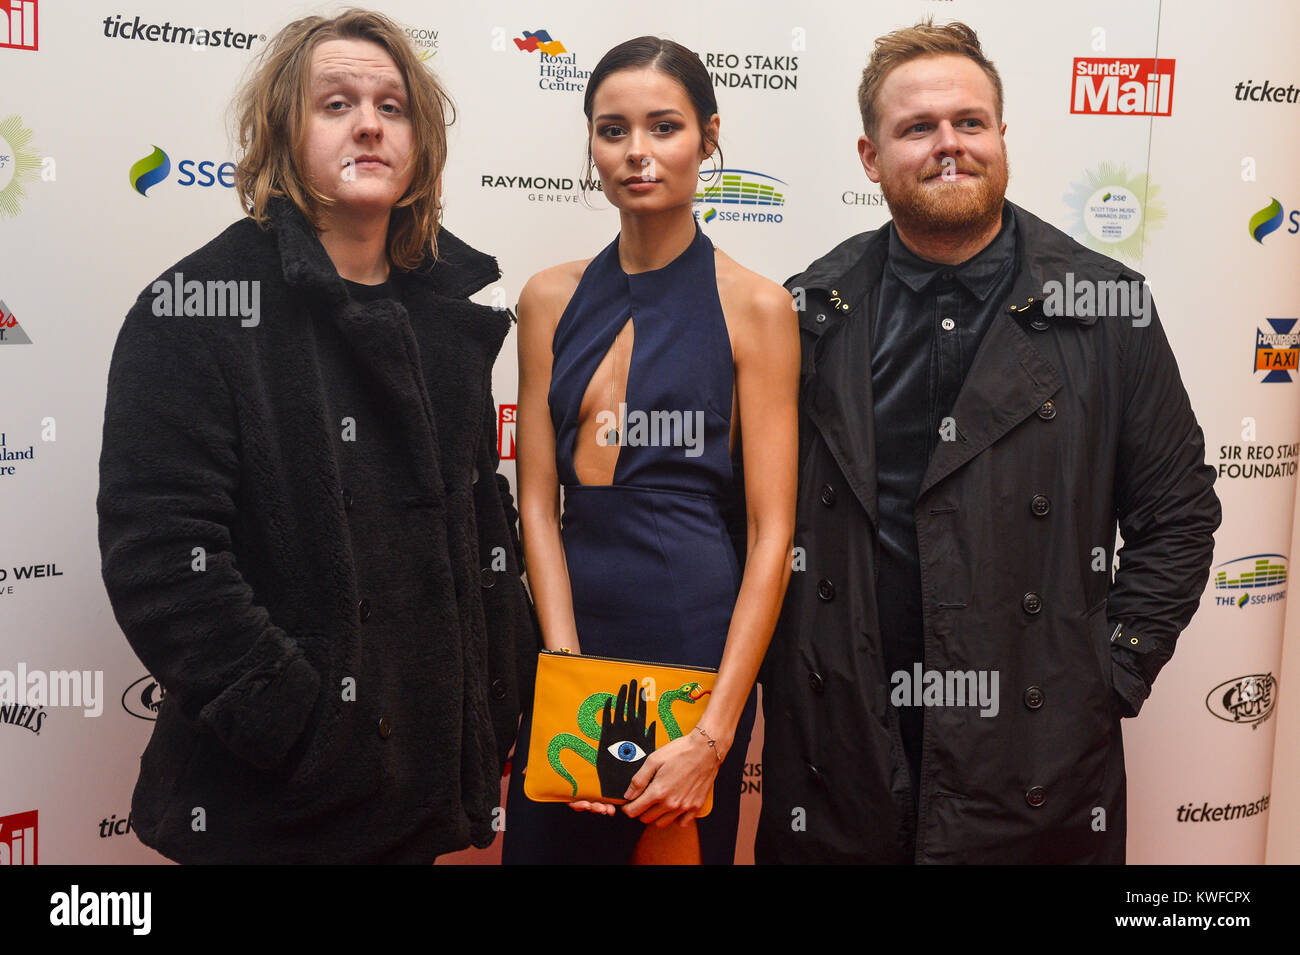 Musicians attend the 19th annual SSE Scottish Music Awards at the Old fruit  Market in Glasgow. Featuring: Lewis Capaldi, Nina Nesbitt, Tom Walker  Where: Glasgow, United Kingdom When: 02 Dec 2017 Credit: